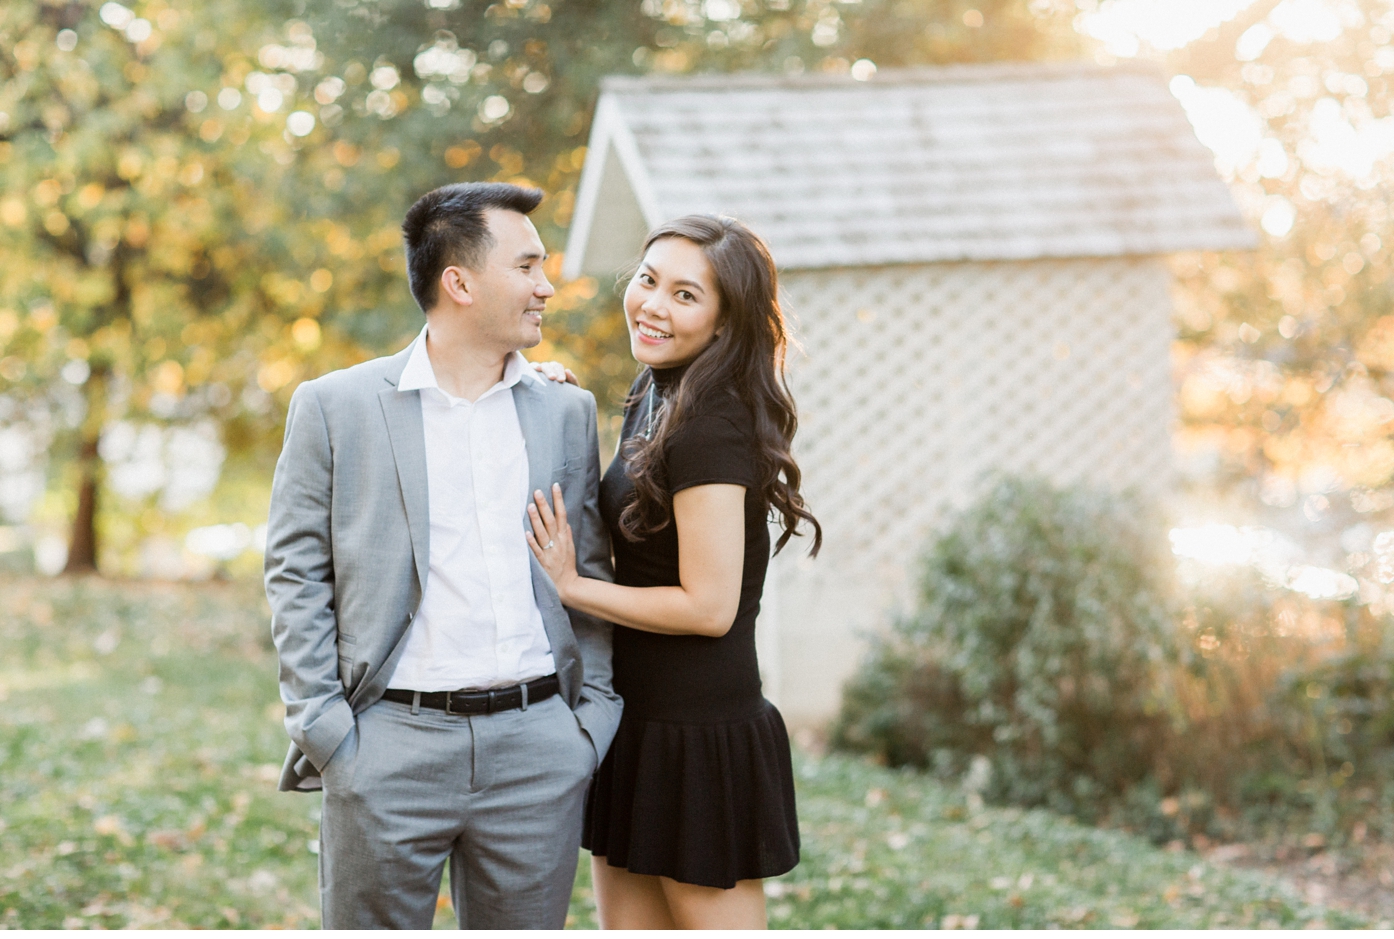 Cherry Hill Farmhouse Engagement Session in Falls Church Virginia by Alisandra Photography